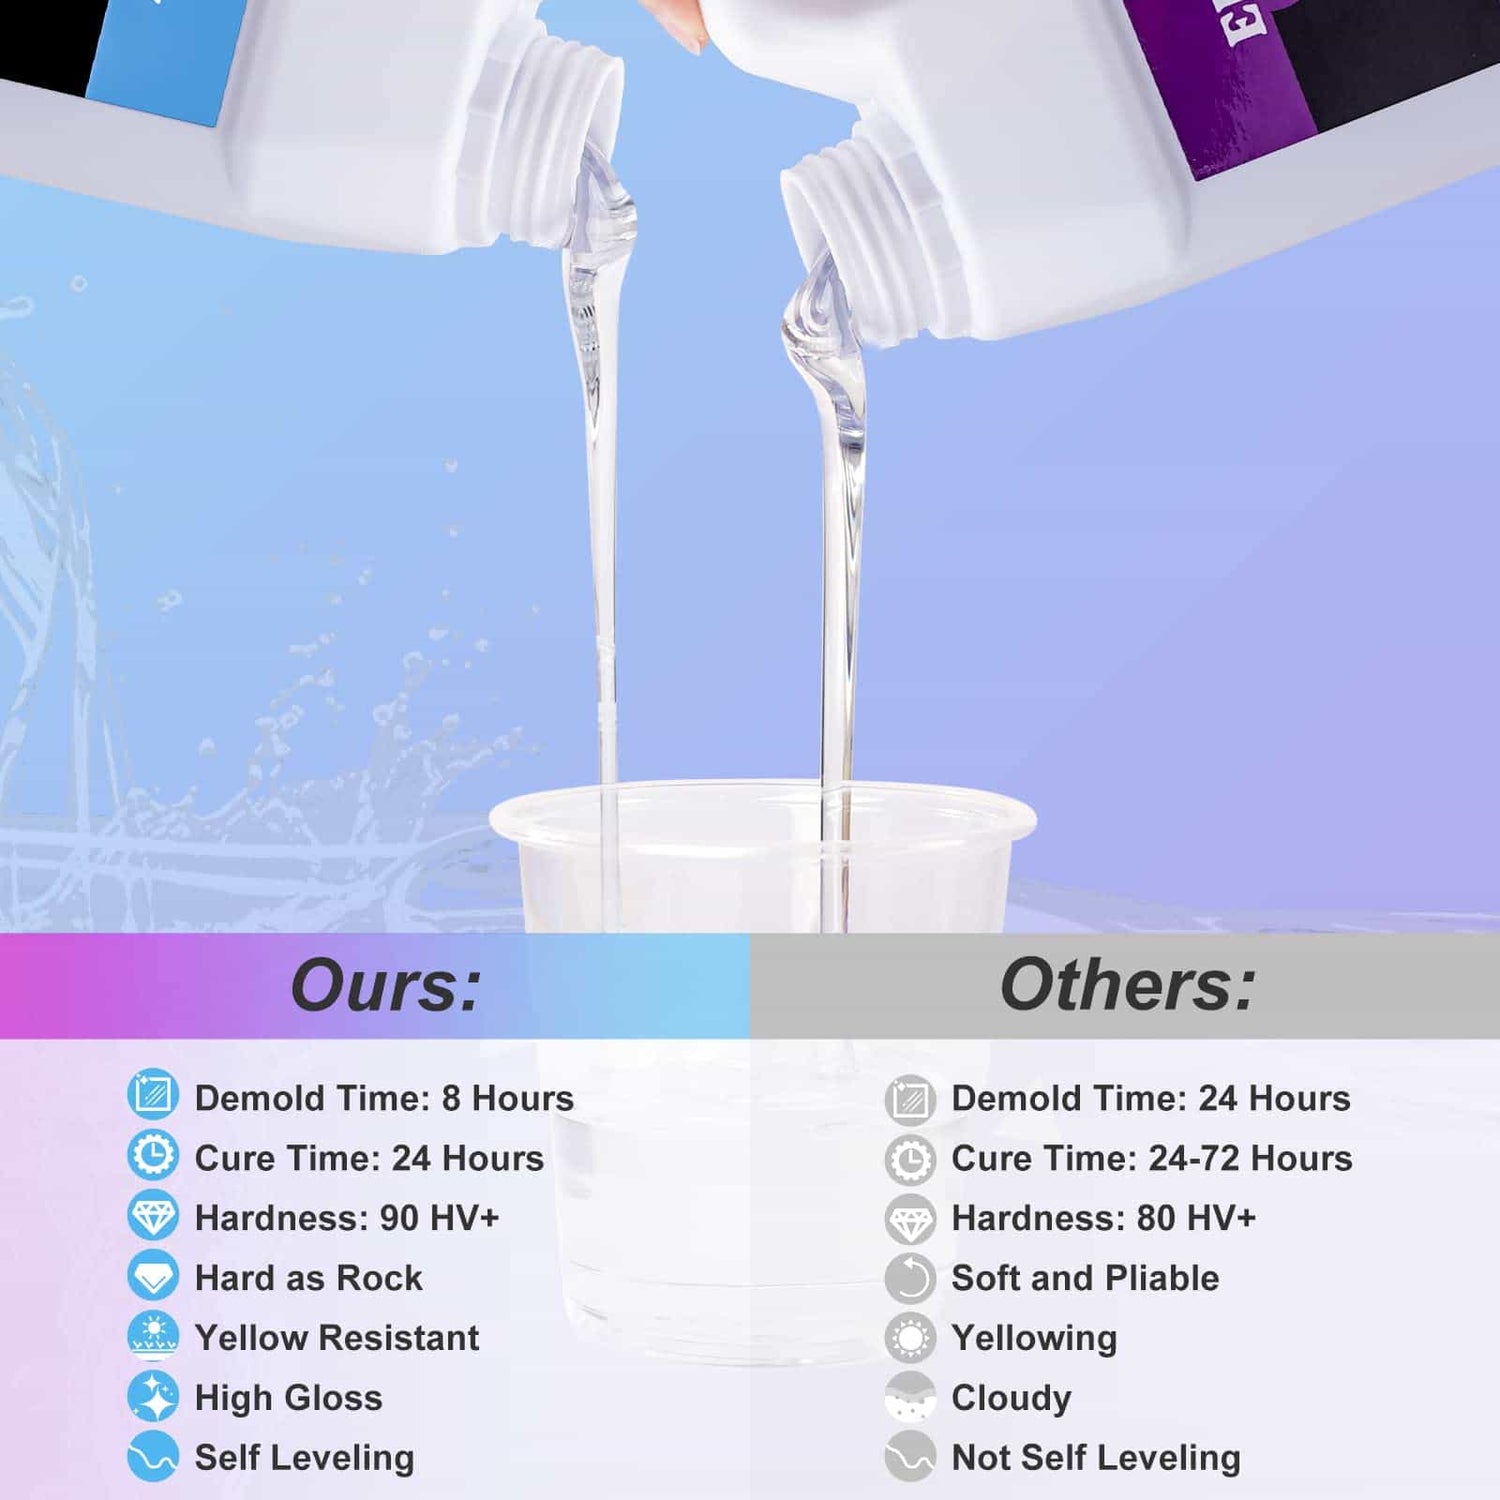 44oz Epoxy Resin Kit with Epoxy Mixer, Cups, Transfer Pipettes – Let's Resin